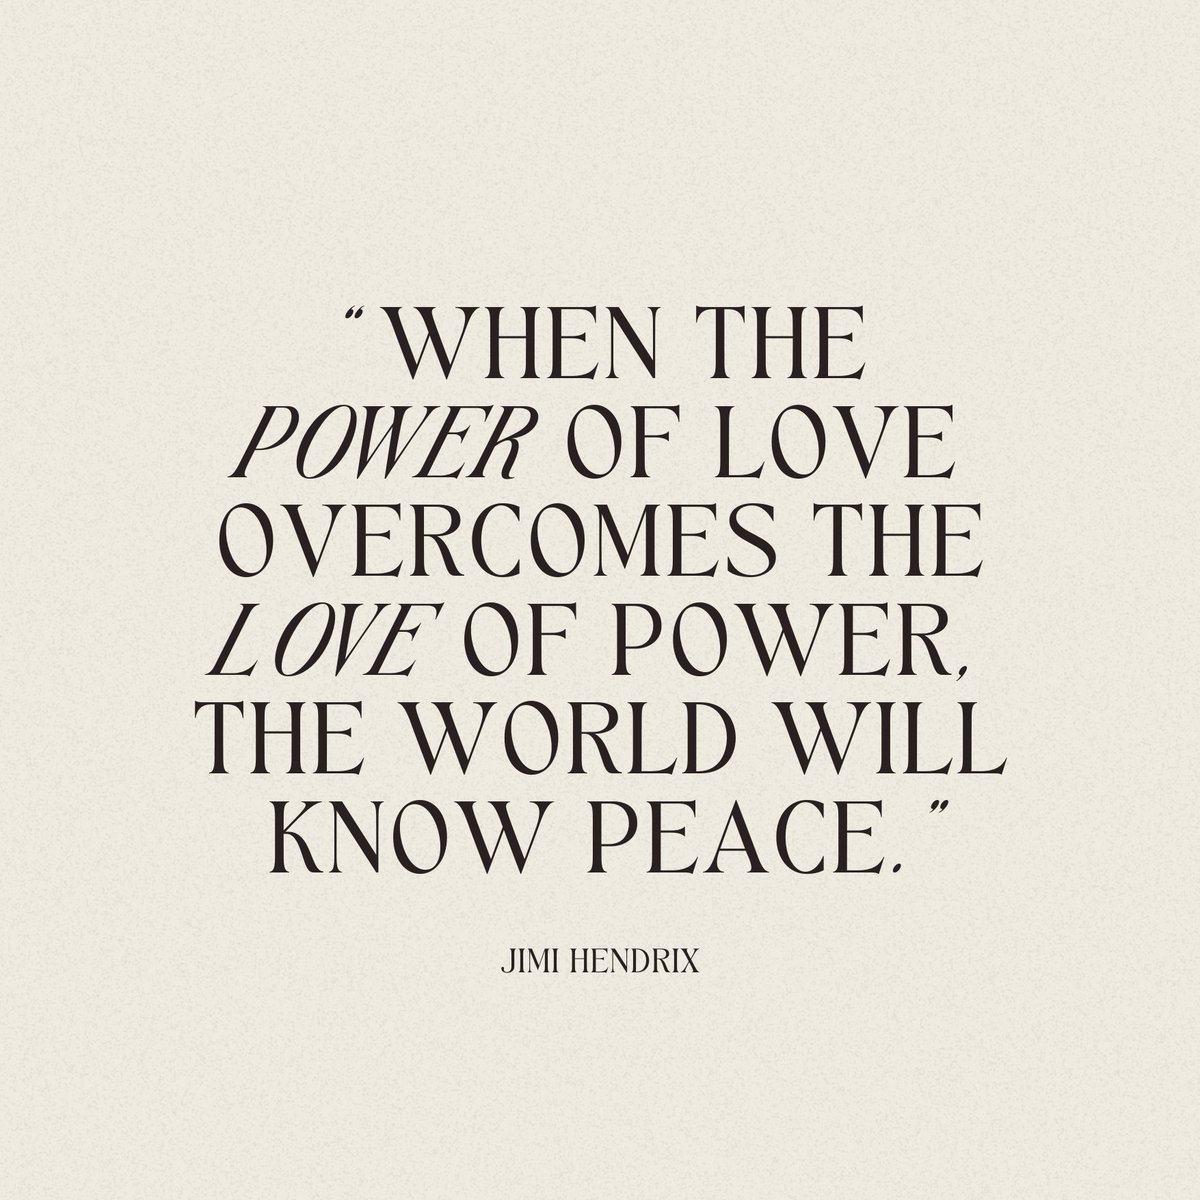 Let's cultivate a world where the power of love triumphs over the love of power🌍🤎 Sending you all a gentle wave of tranquility today! Everlasting peace is on its way.

#quoteoftheday #quotestoliveby #inspiringquotes #peacefulquotes #chillpalm #chillpalmsounds